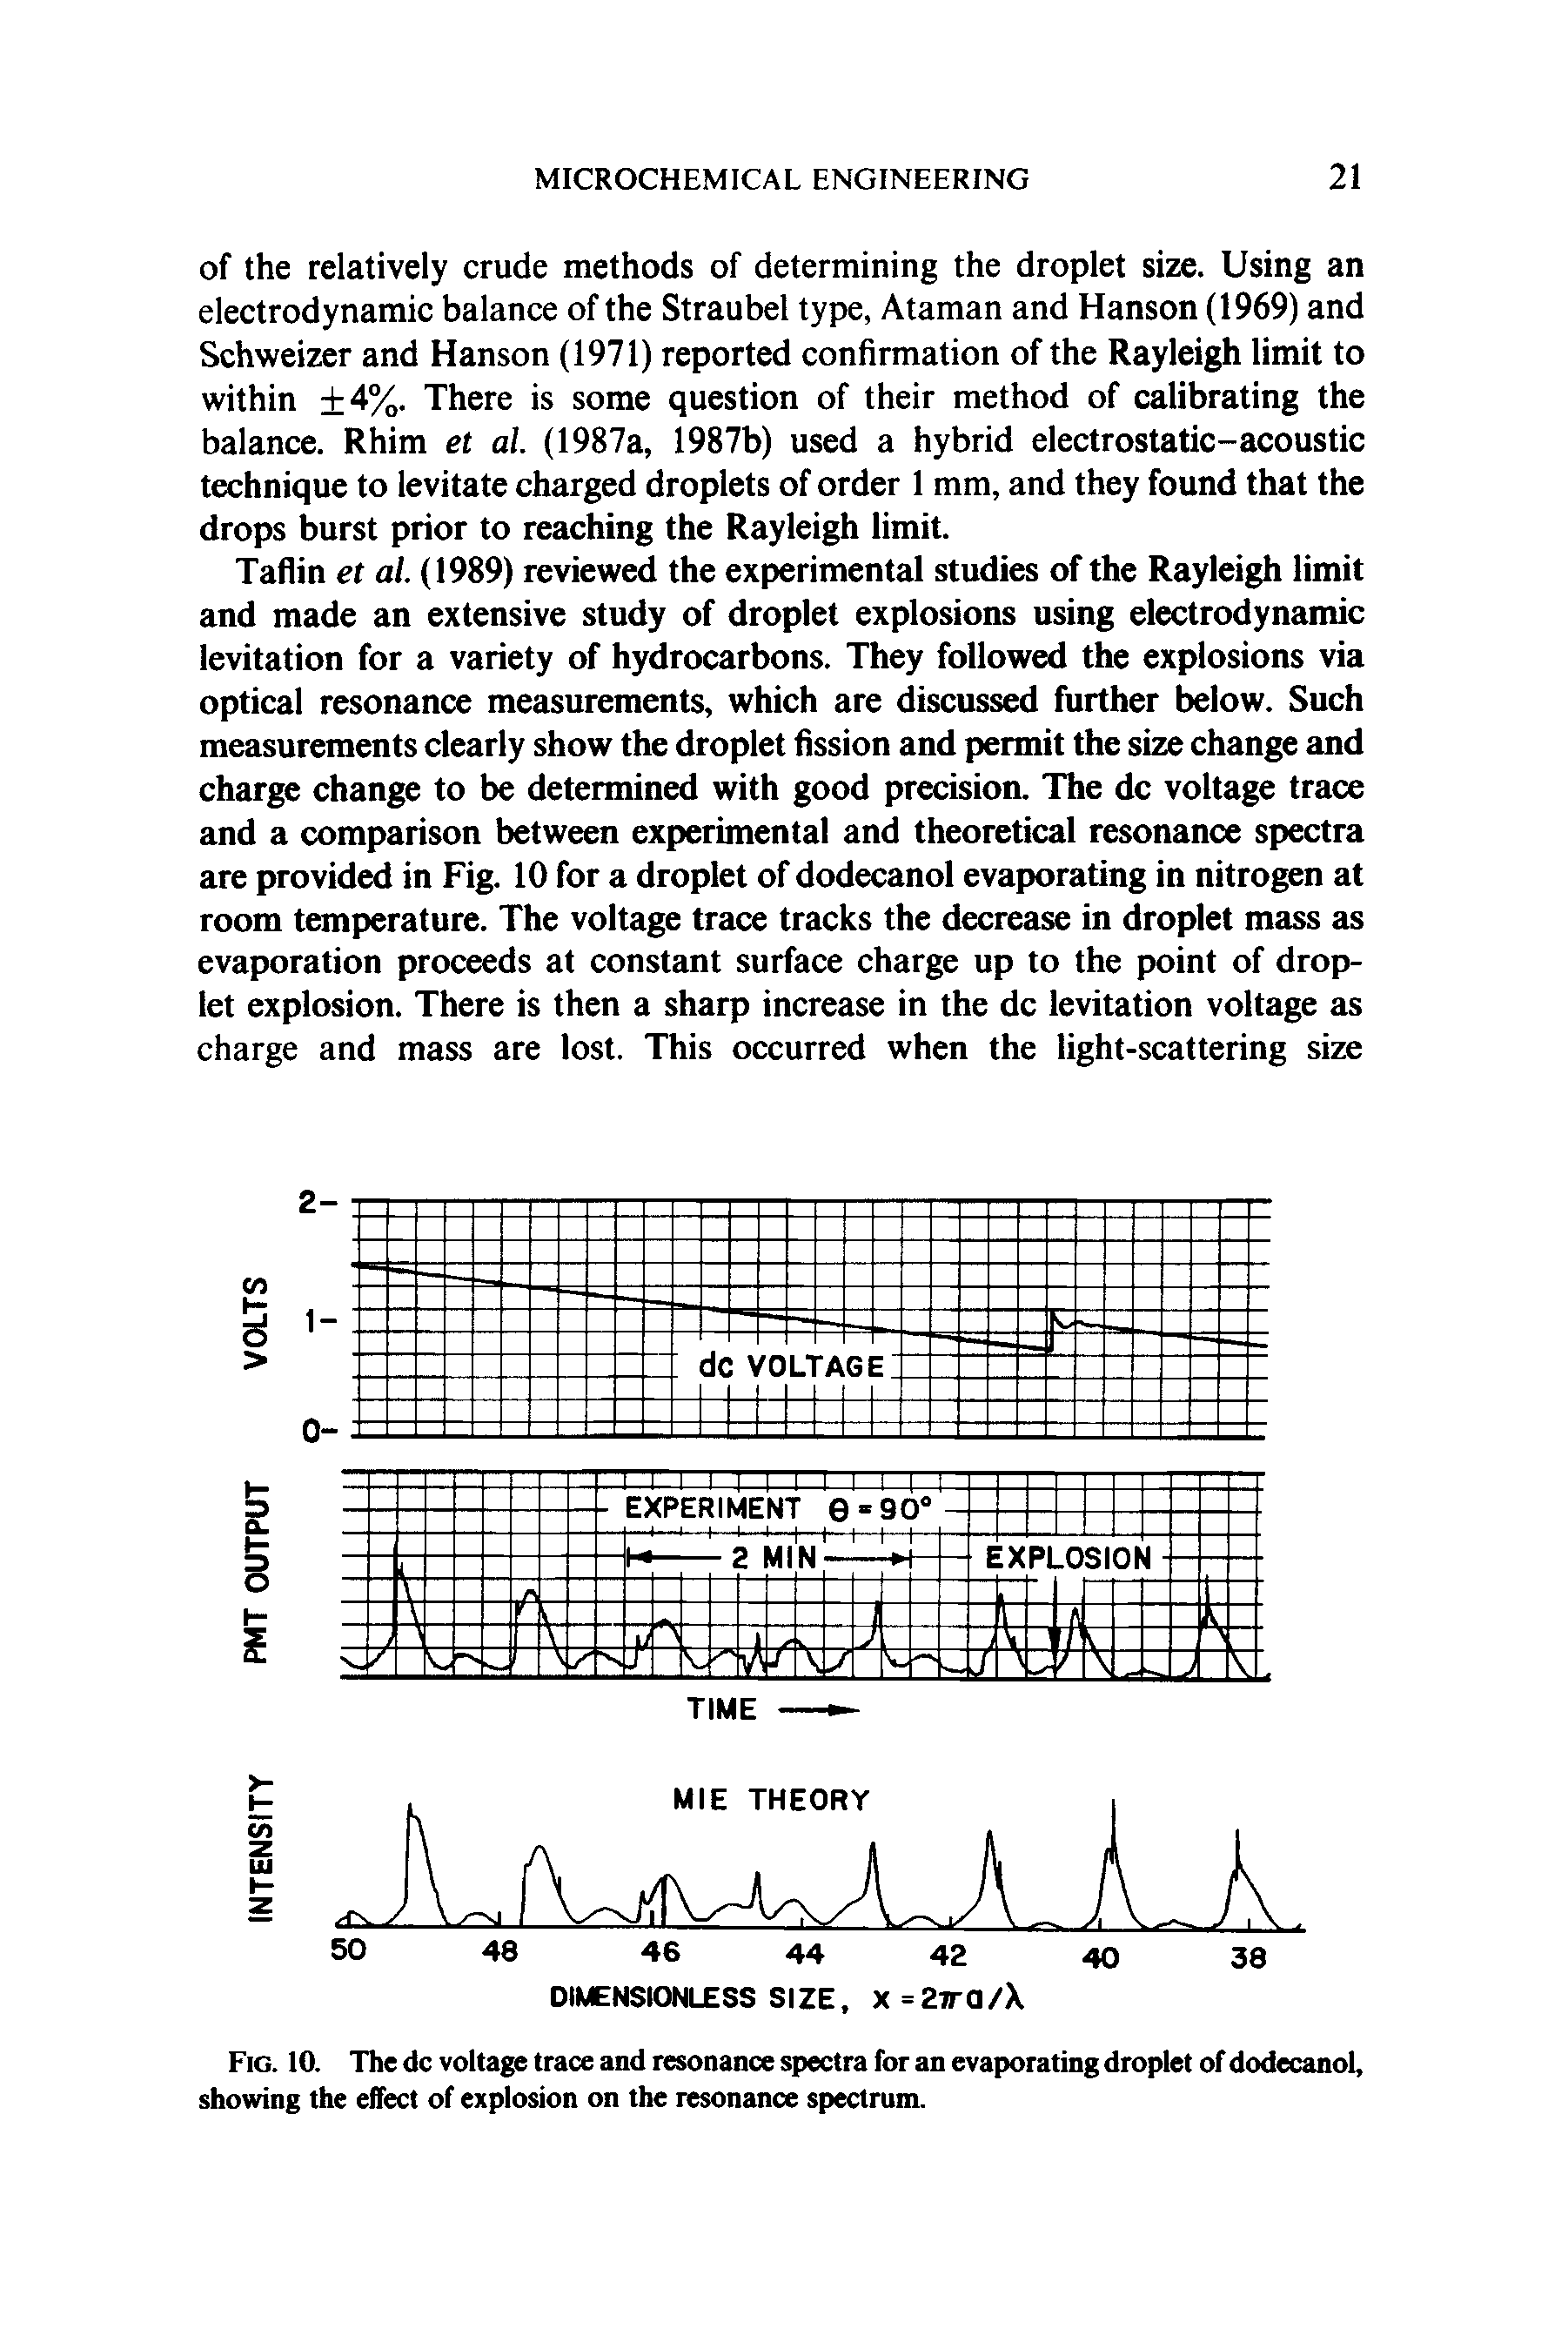 Fig. 10. The dc voltage trace and resonance spectra for an evaporating droplet of dodecanol, showing the effect of explosion on the resonance spectrum.